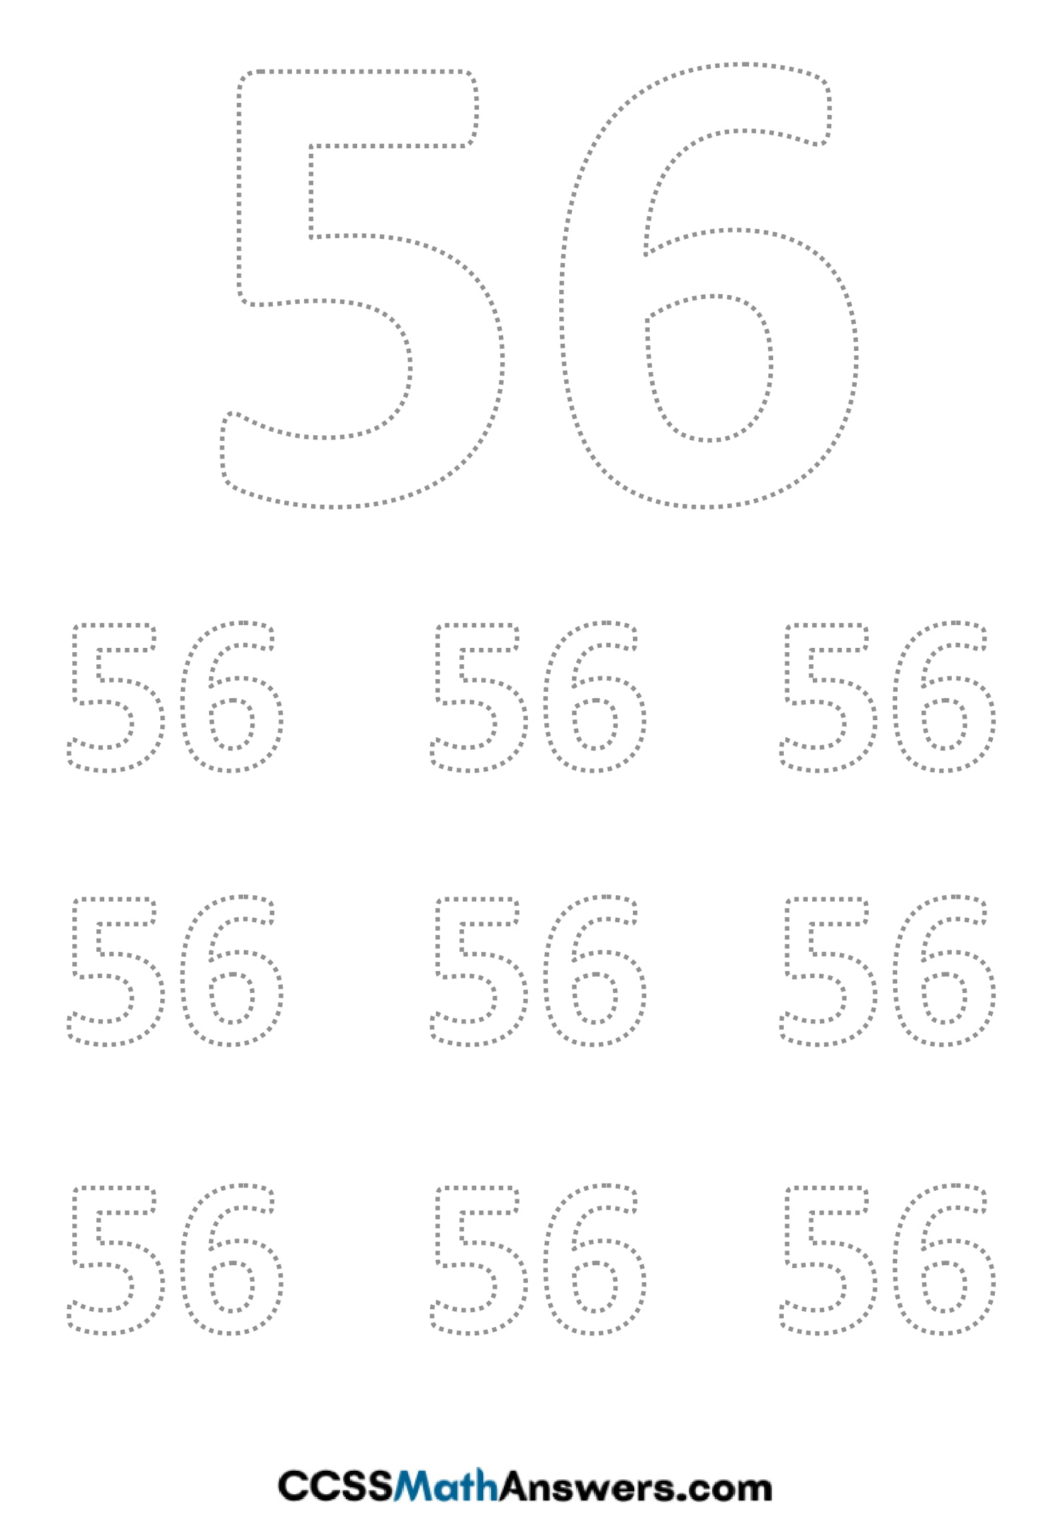 Worksheet On Number 56 Printable Number 56 Tracing Writing Counting Activity Worksheets